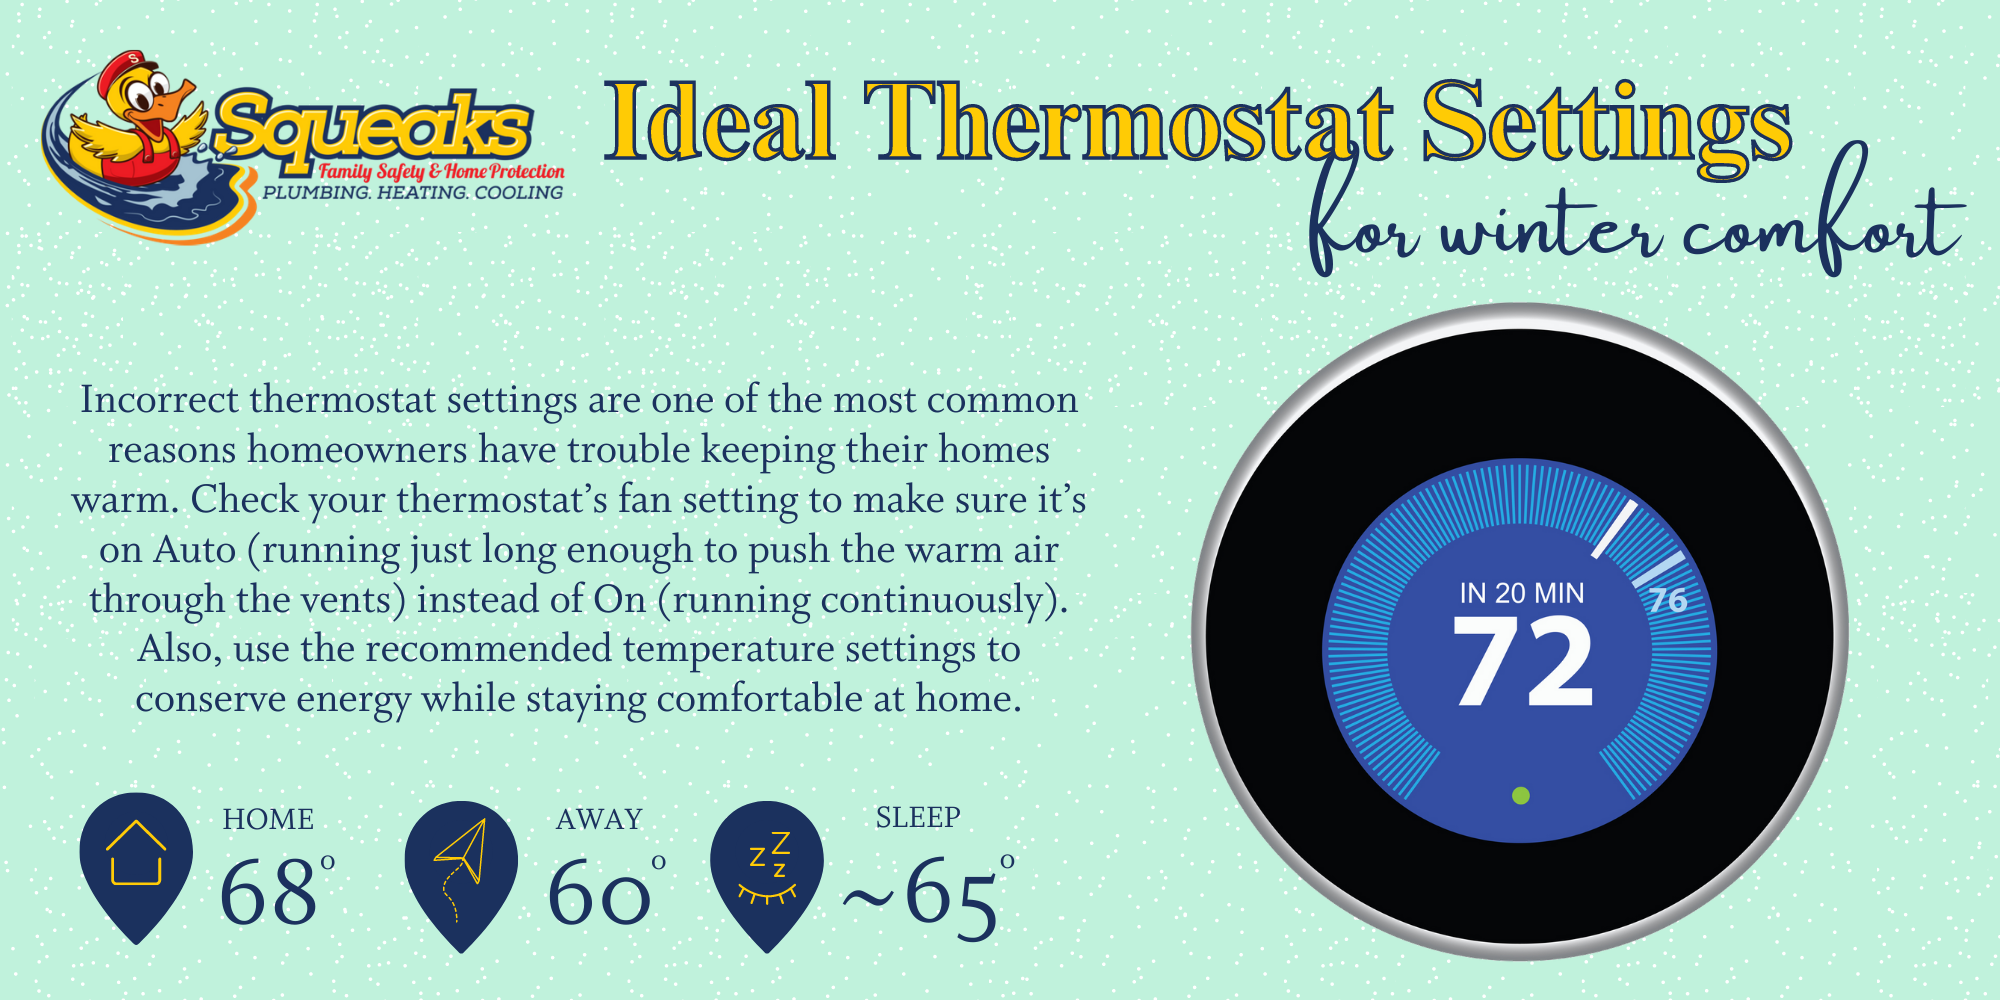 Squeaks - Ideal Thermostat Settings for Winter Comfort Infographic 